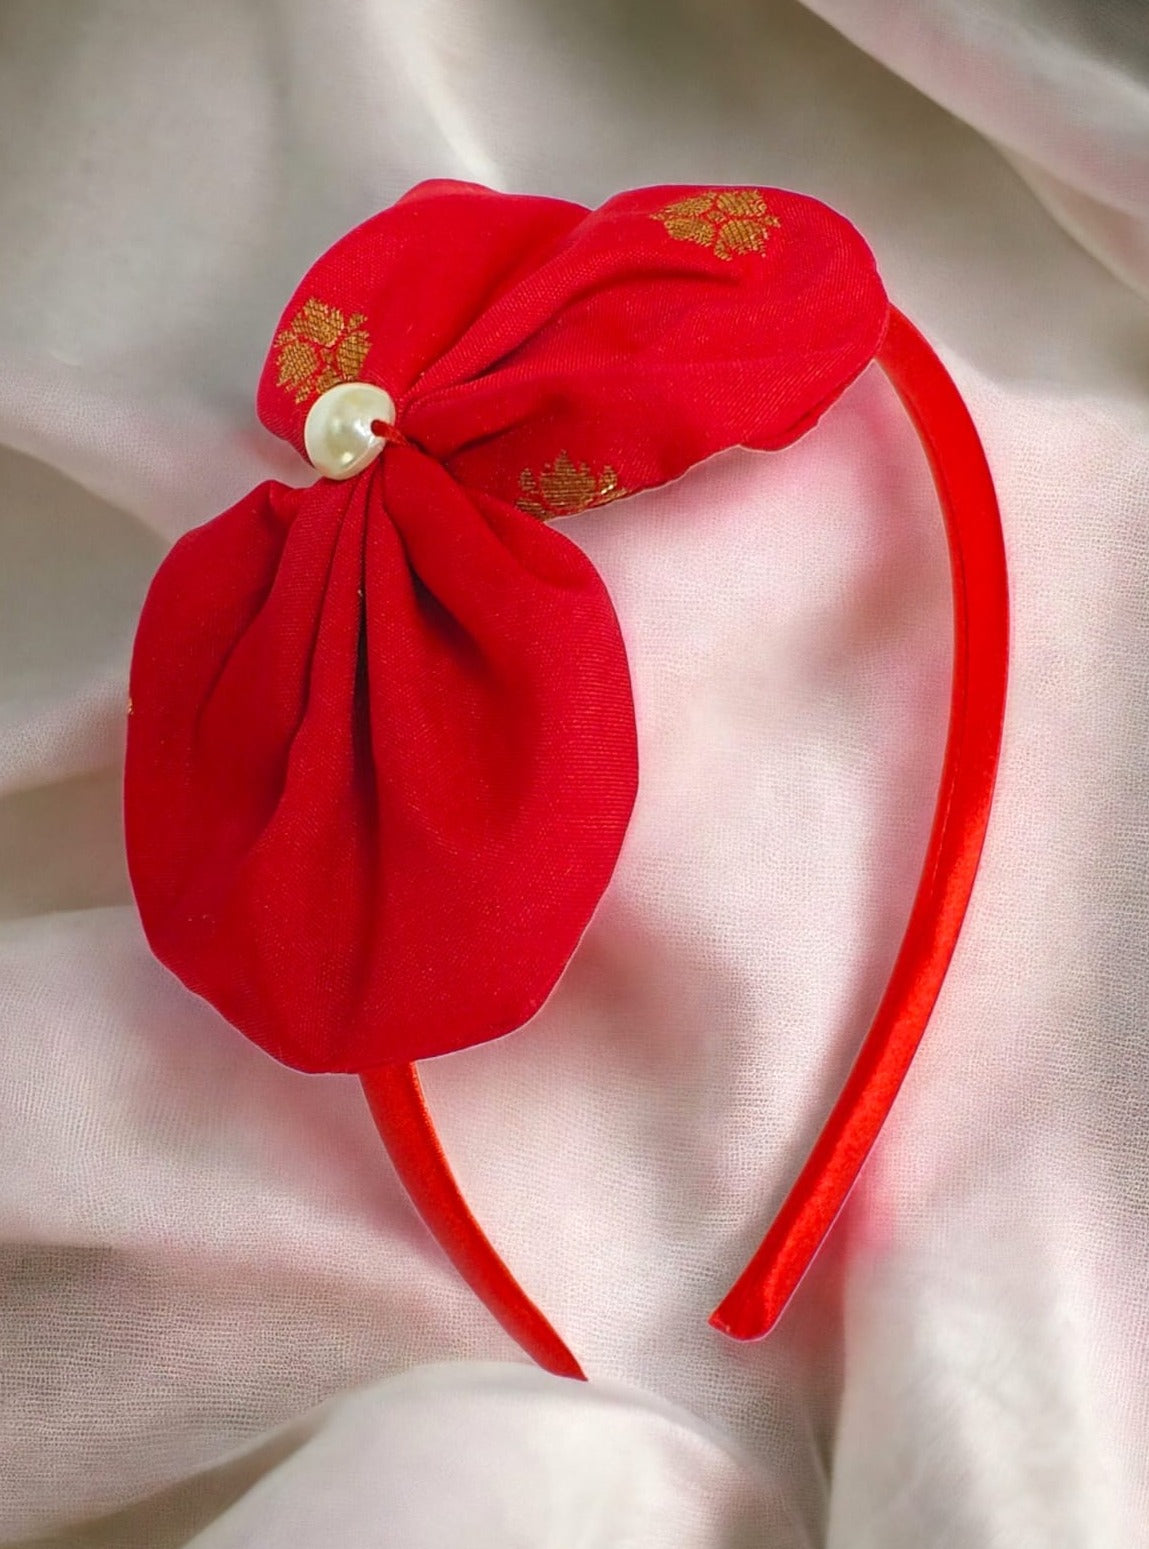 Fab Accessories Padded Braided Hairband- Red